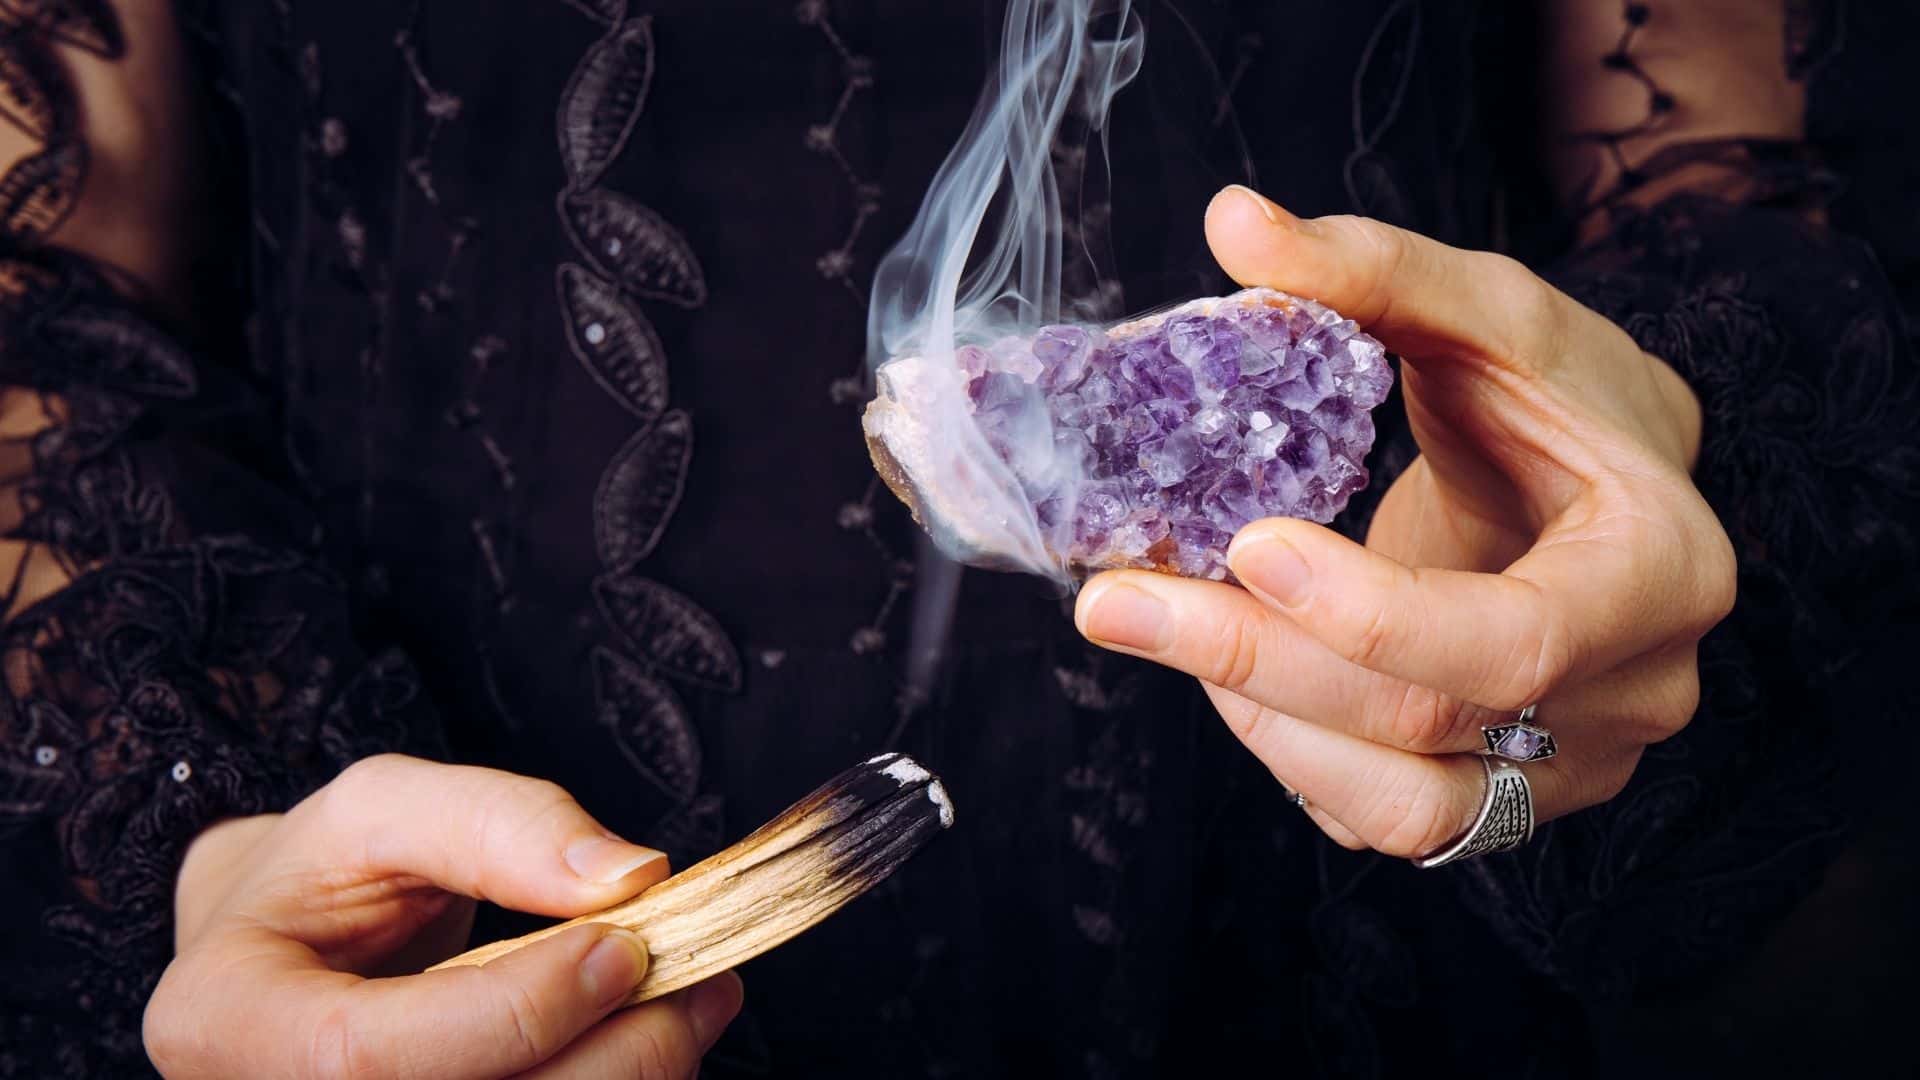 Best Ways to Cleanse Crystals by smudging